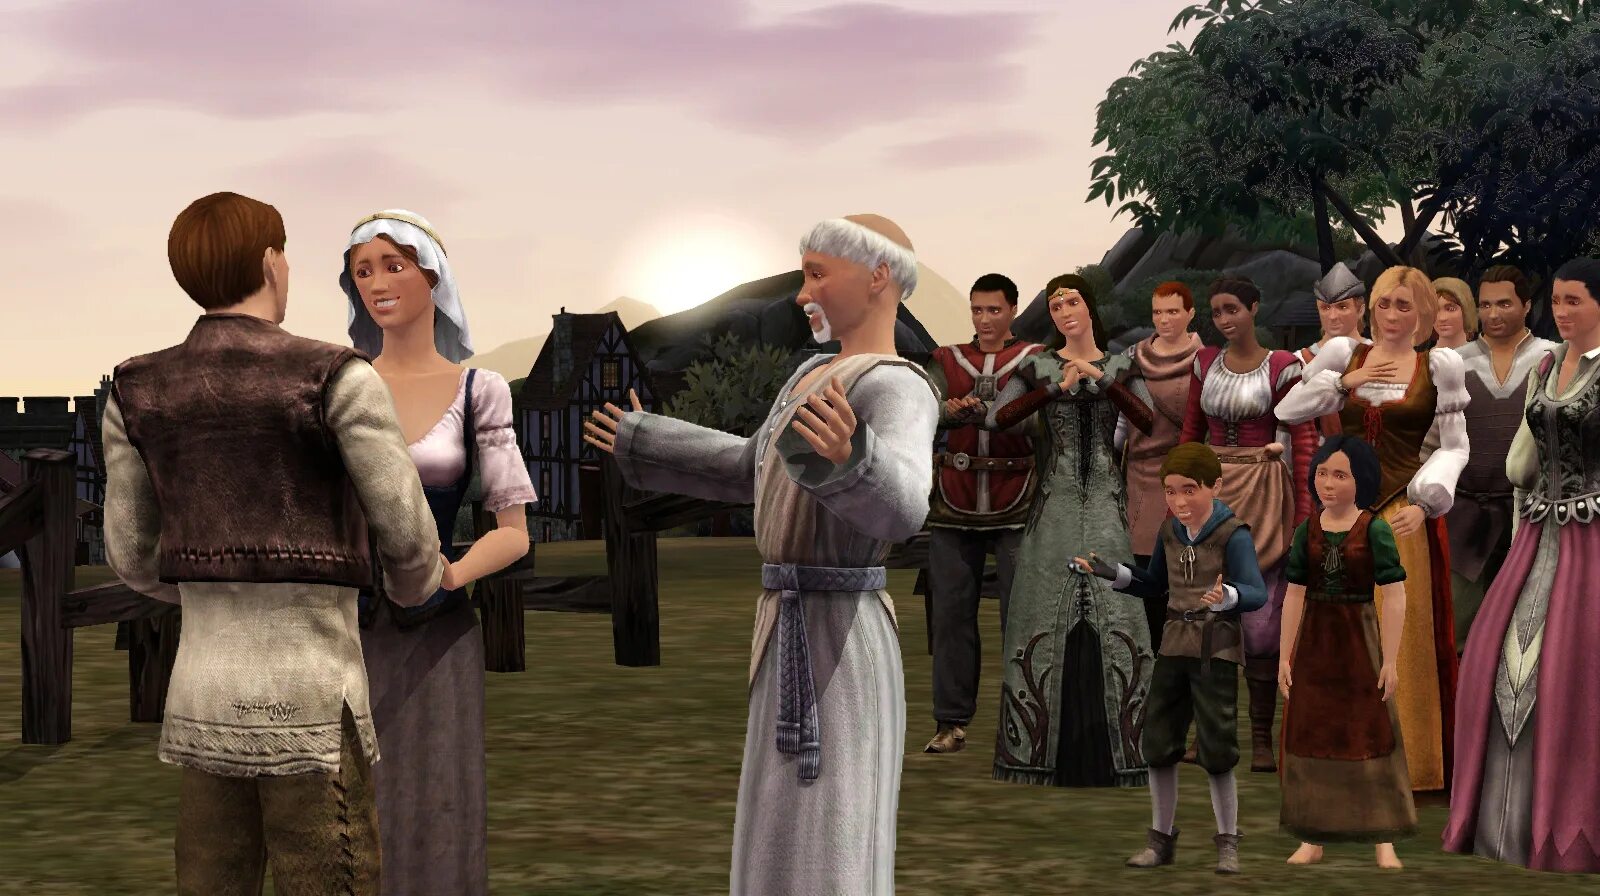 The SIMS Medieval. SIMS 3 Medieval. Симс 3 медивал Король. SIMS Medieval +18. Middle ages 1